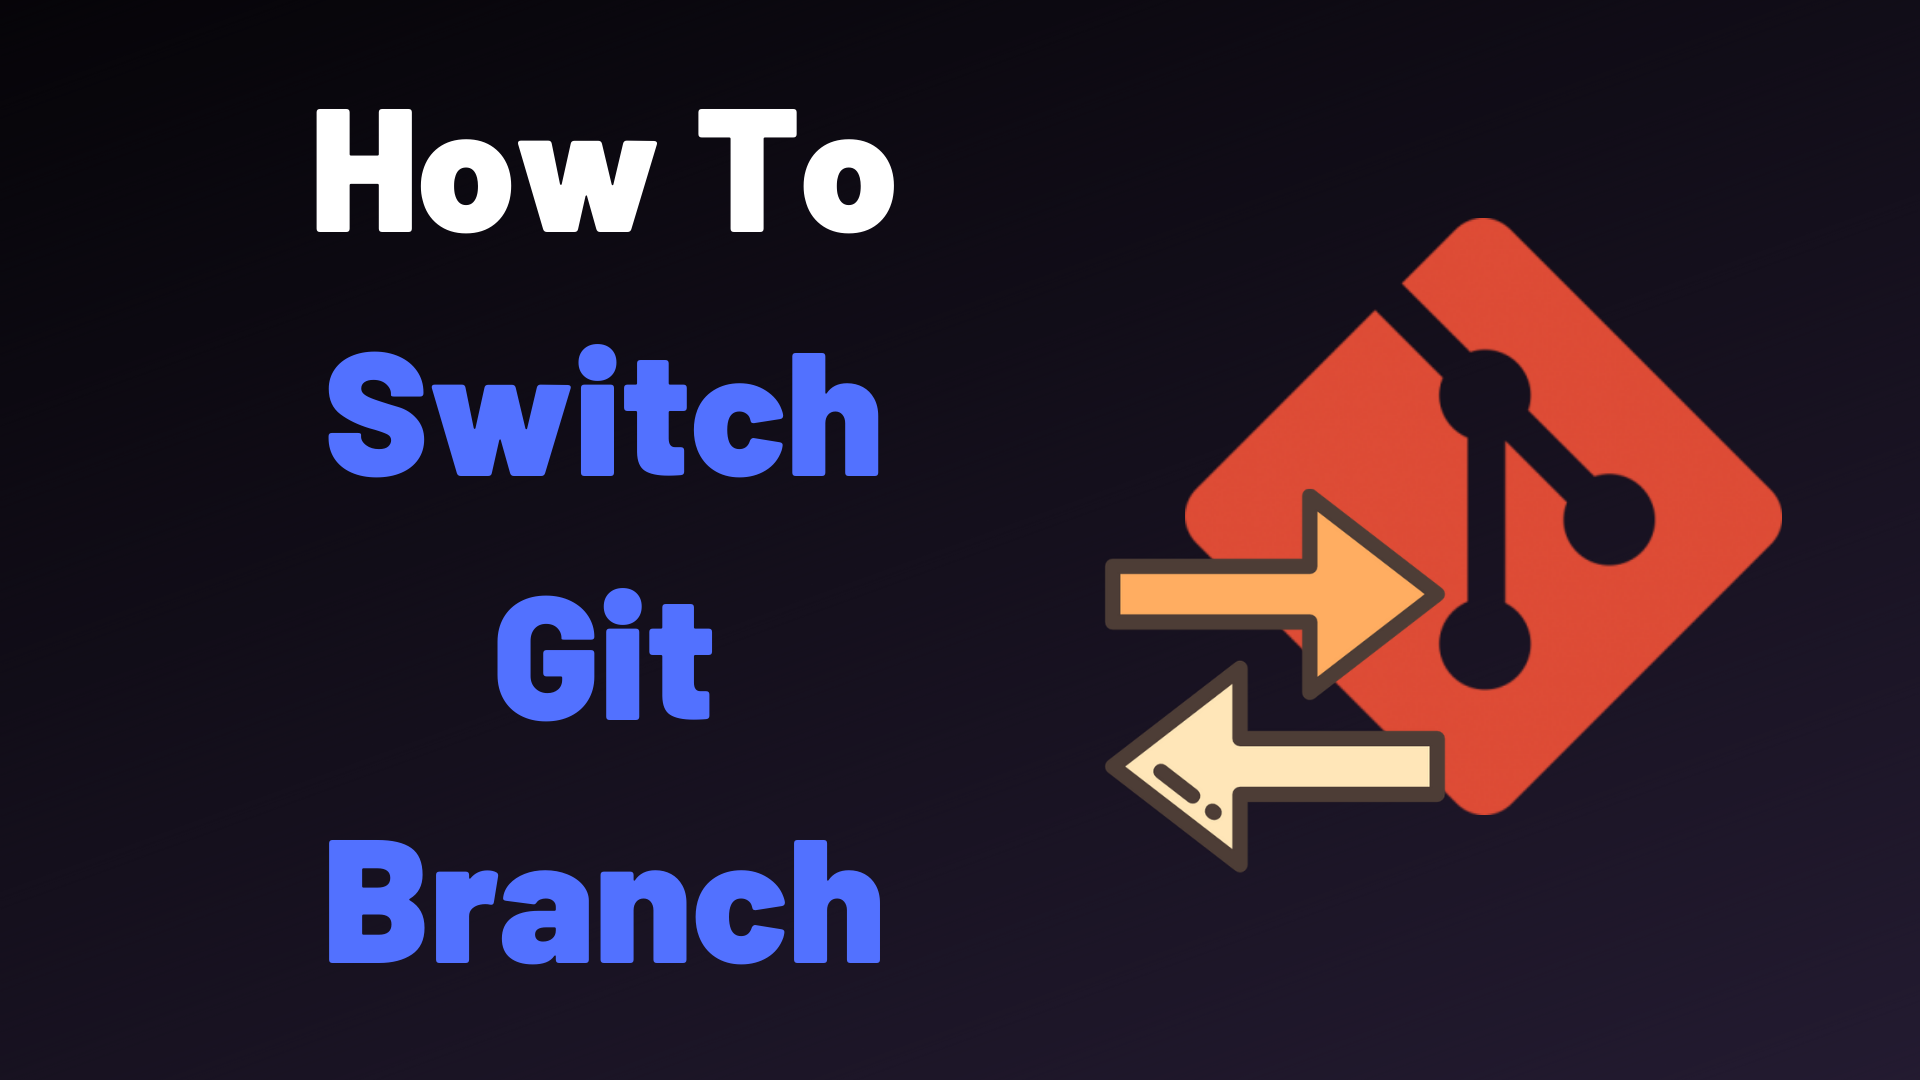 How To Switch Branch on Git